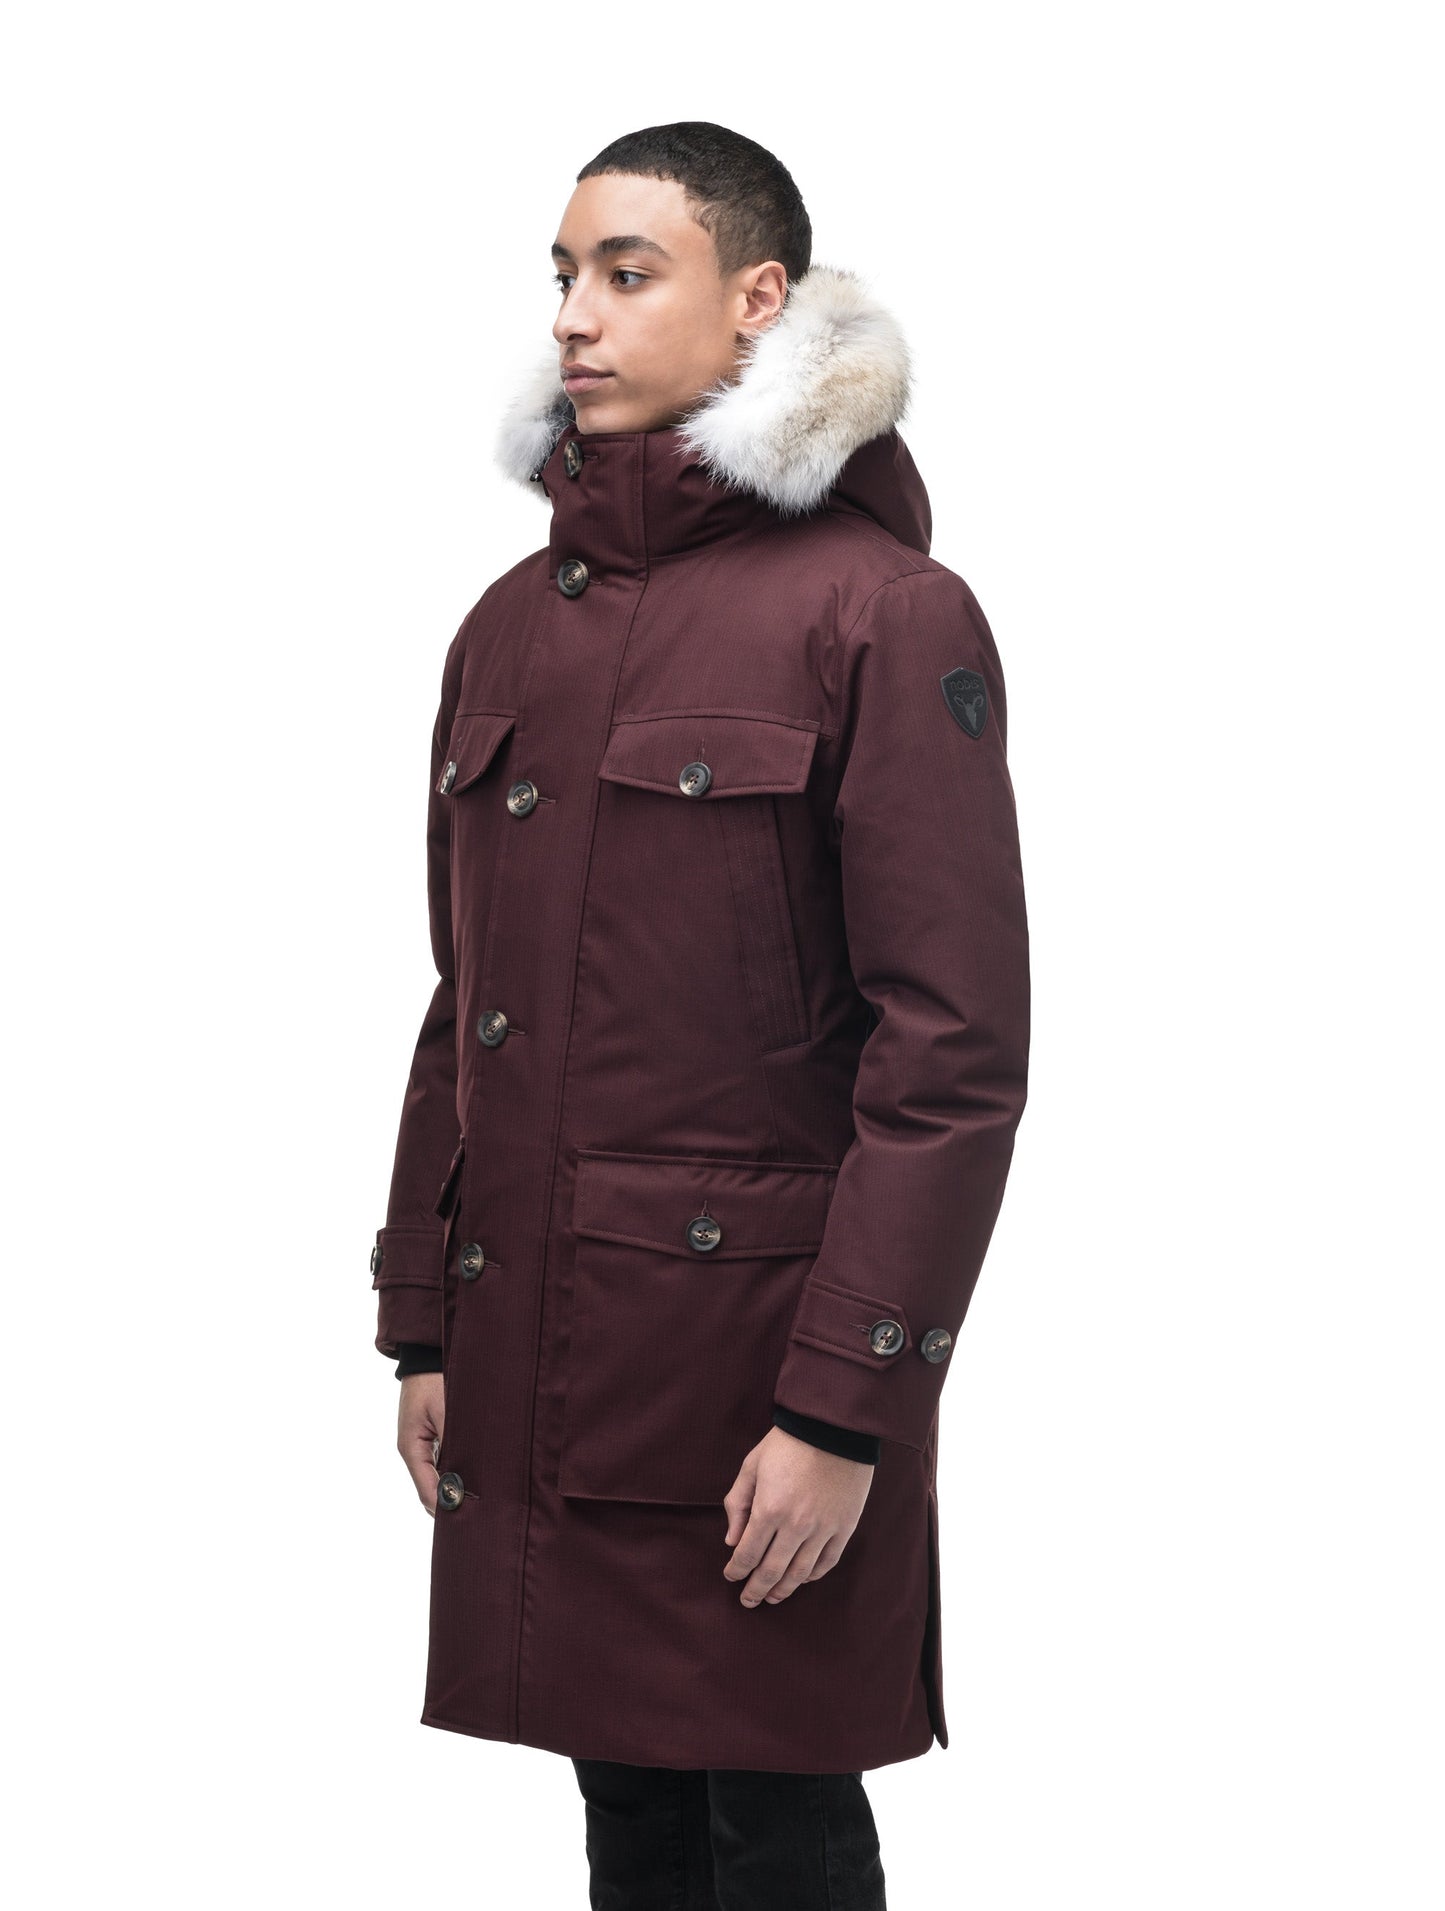 Citizen Men's Tailored Parka in knee length, Canadian duck down insulation, non-removable hood, and two-way zipper, in Merlot